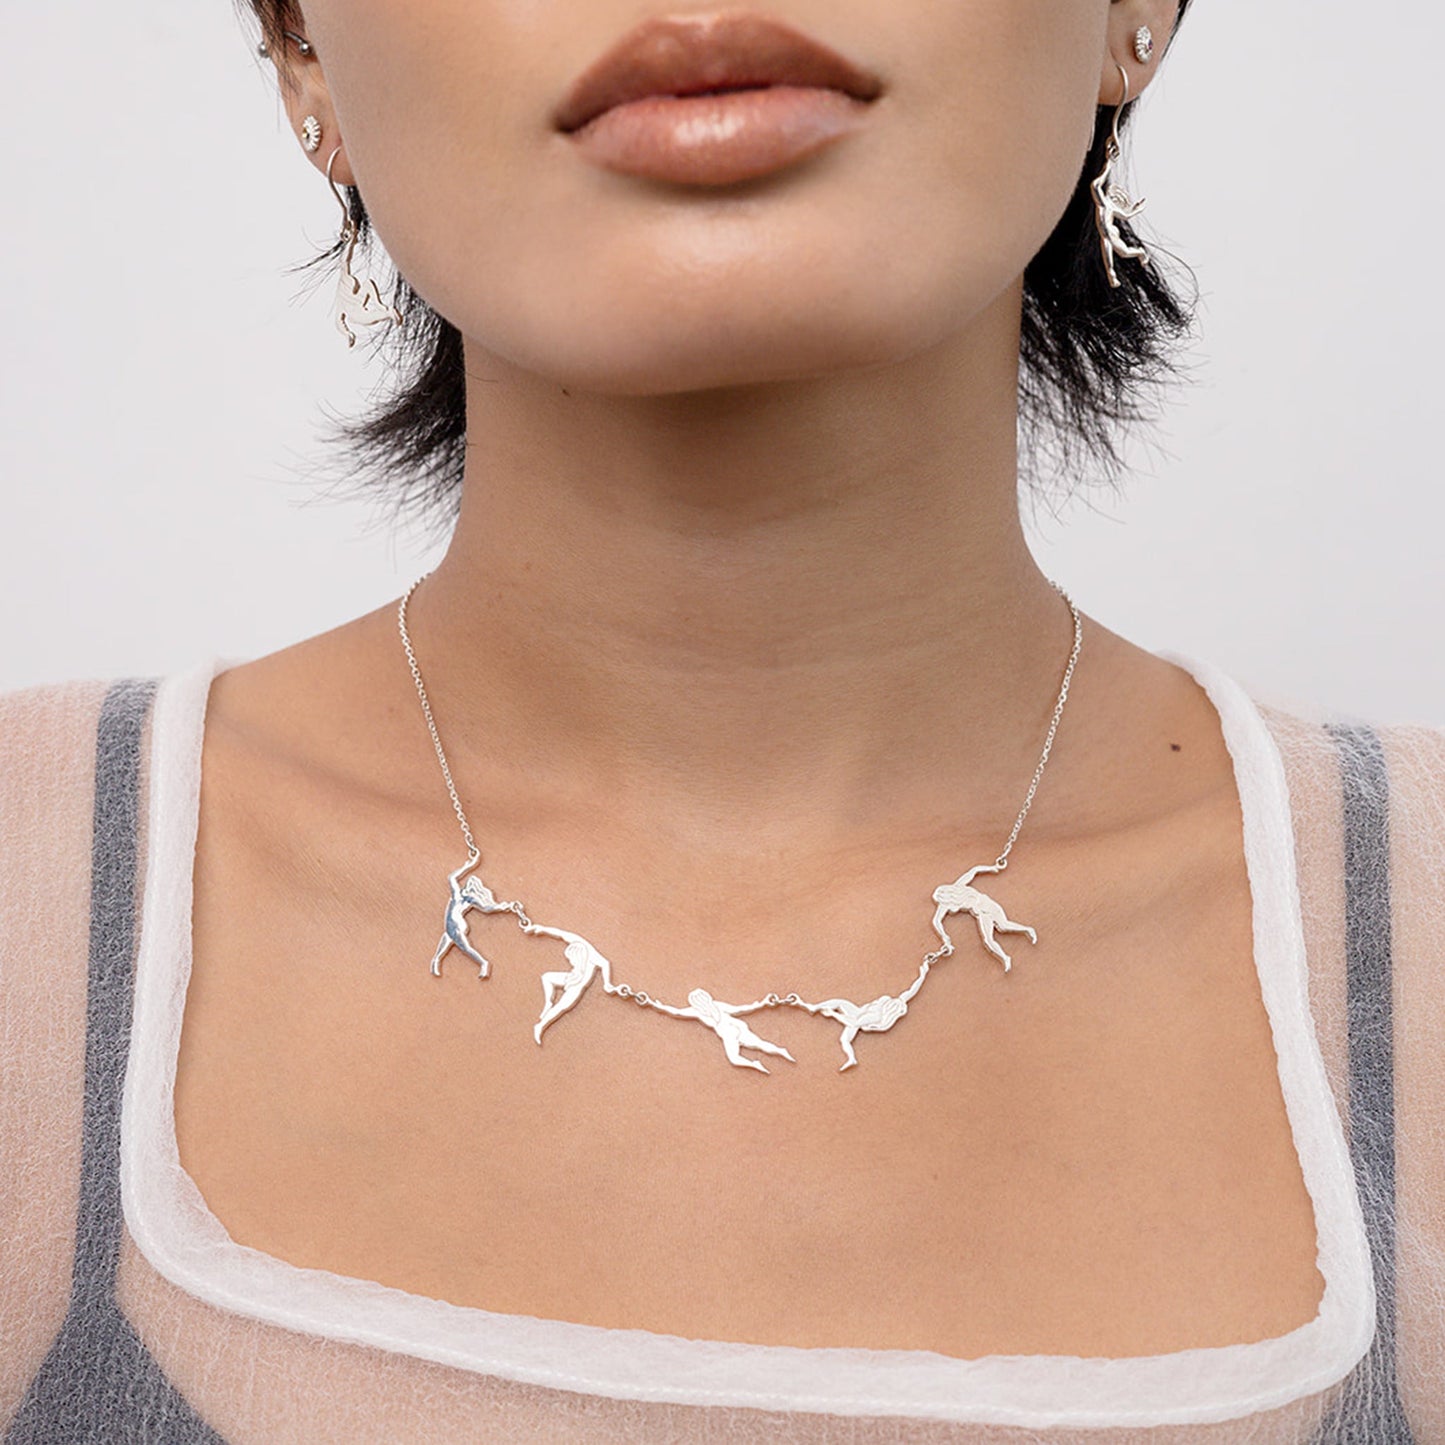 Female Dancers on Silver Chain Necklace - Hunt Of Hounds